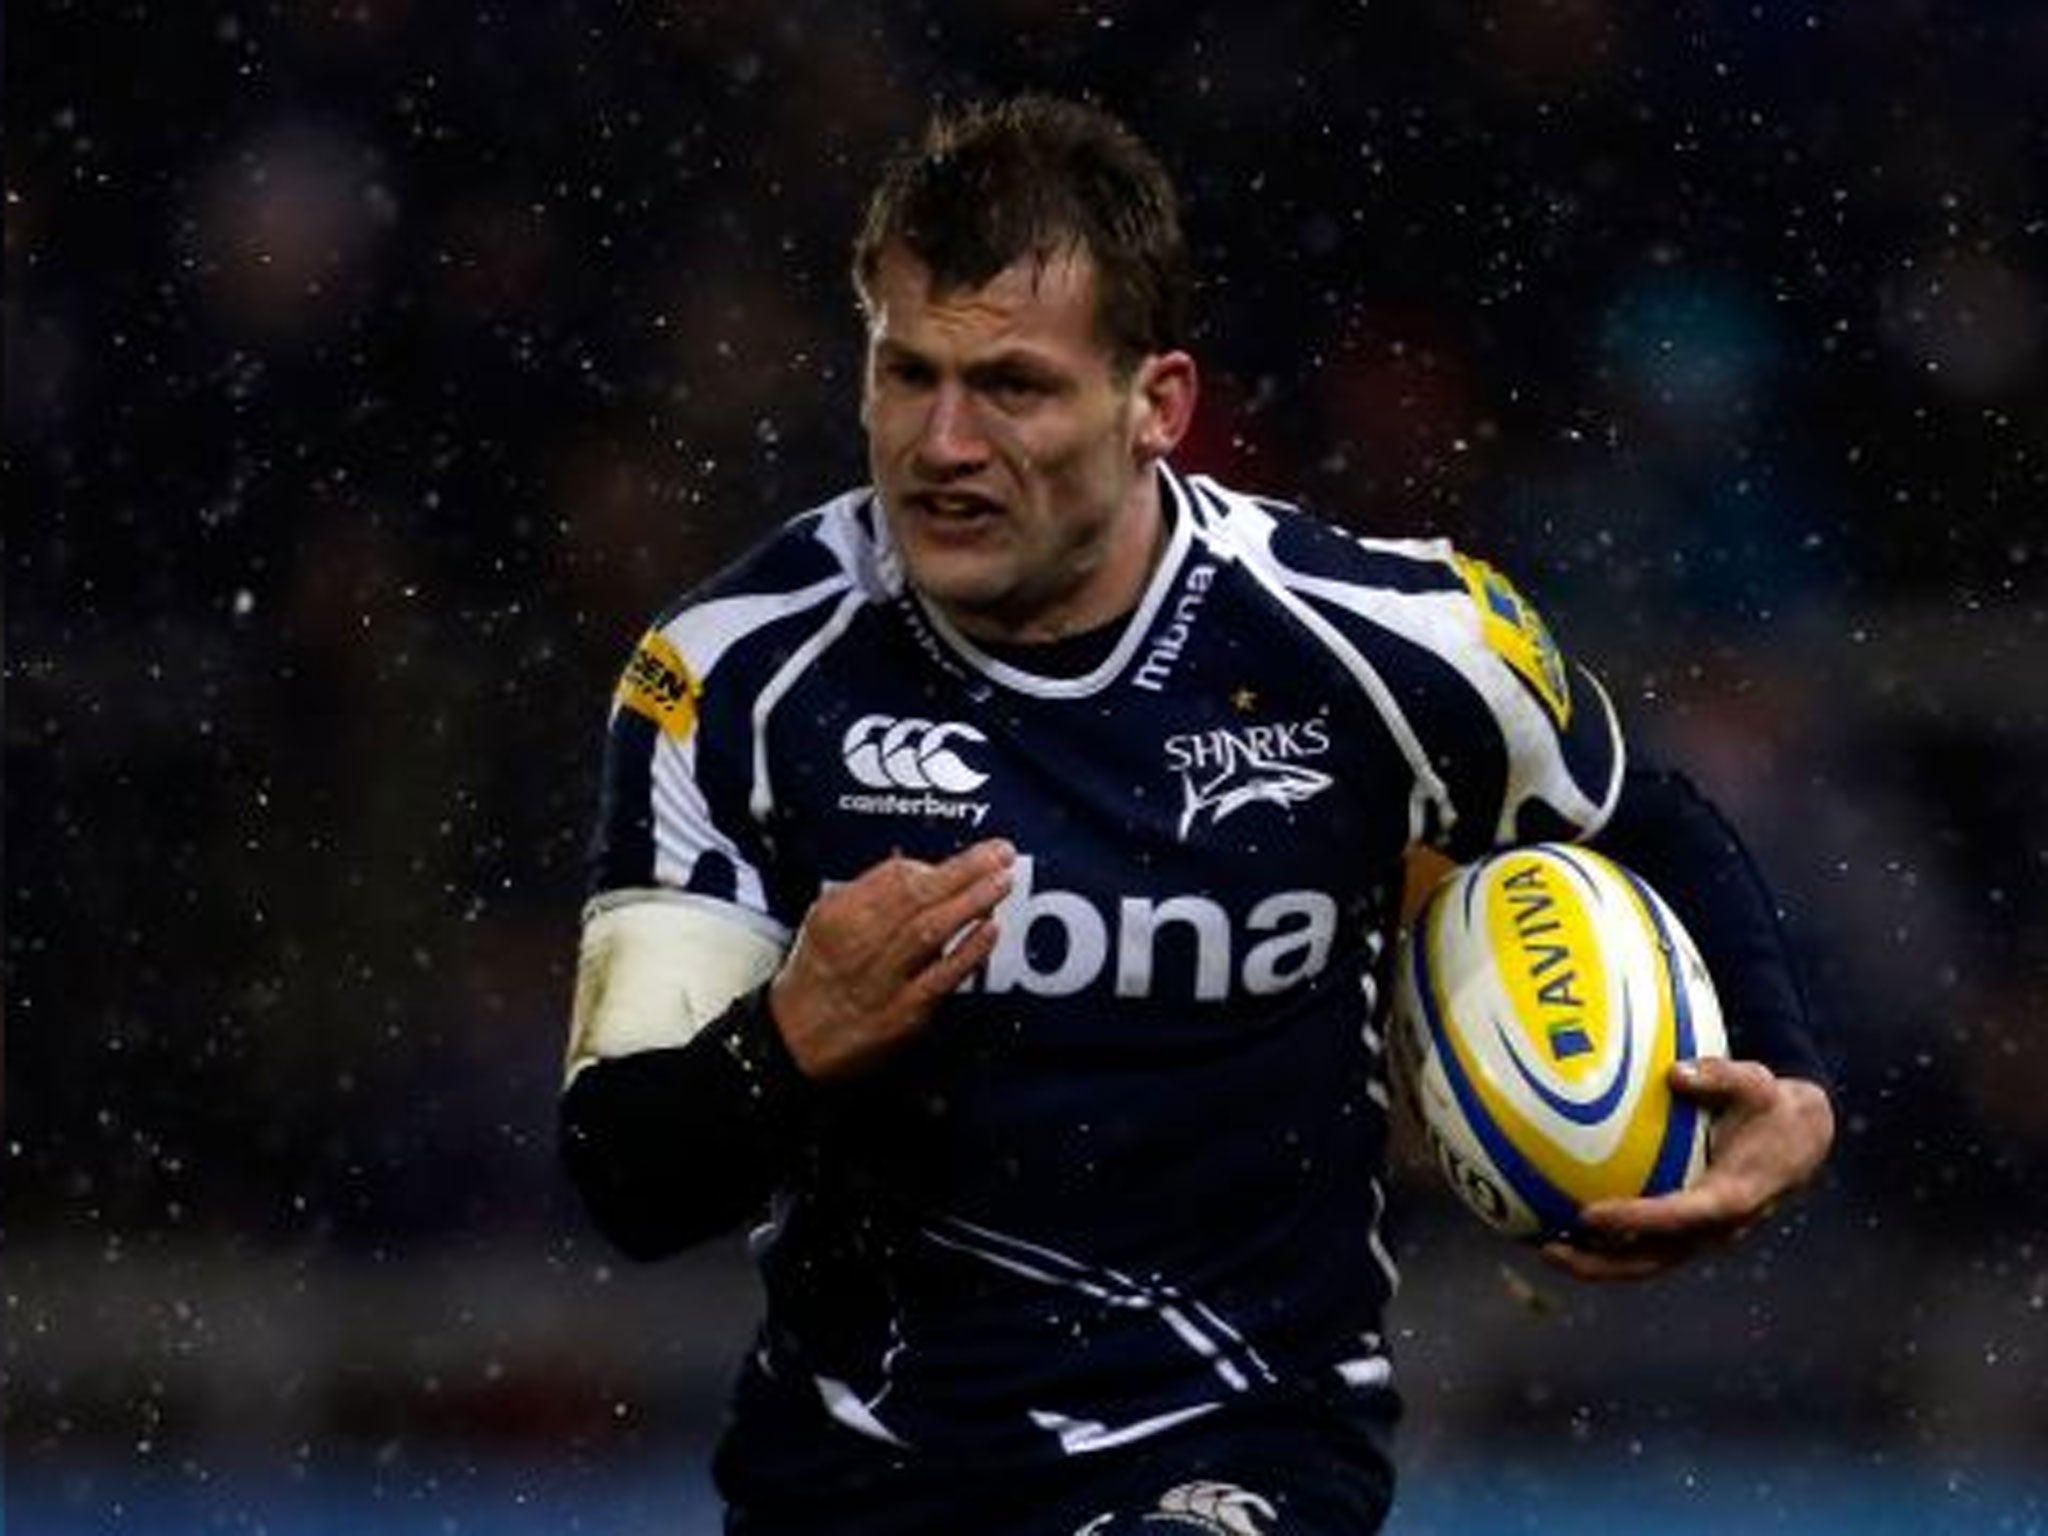 Sale got off to a flying start, leading 14-3 by half-time thanks to a try from Mark Cueto